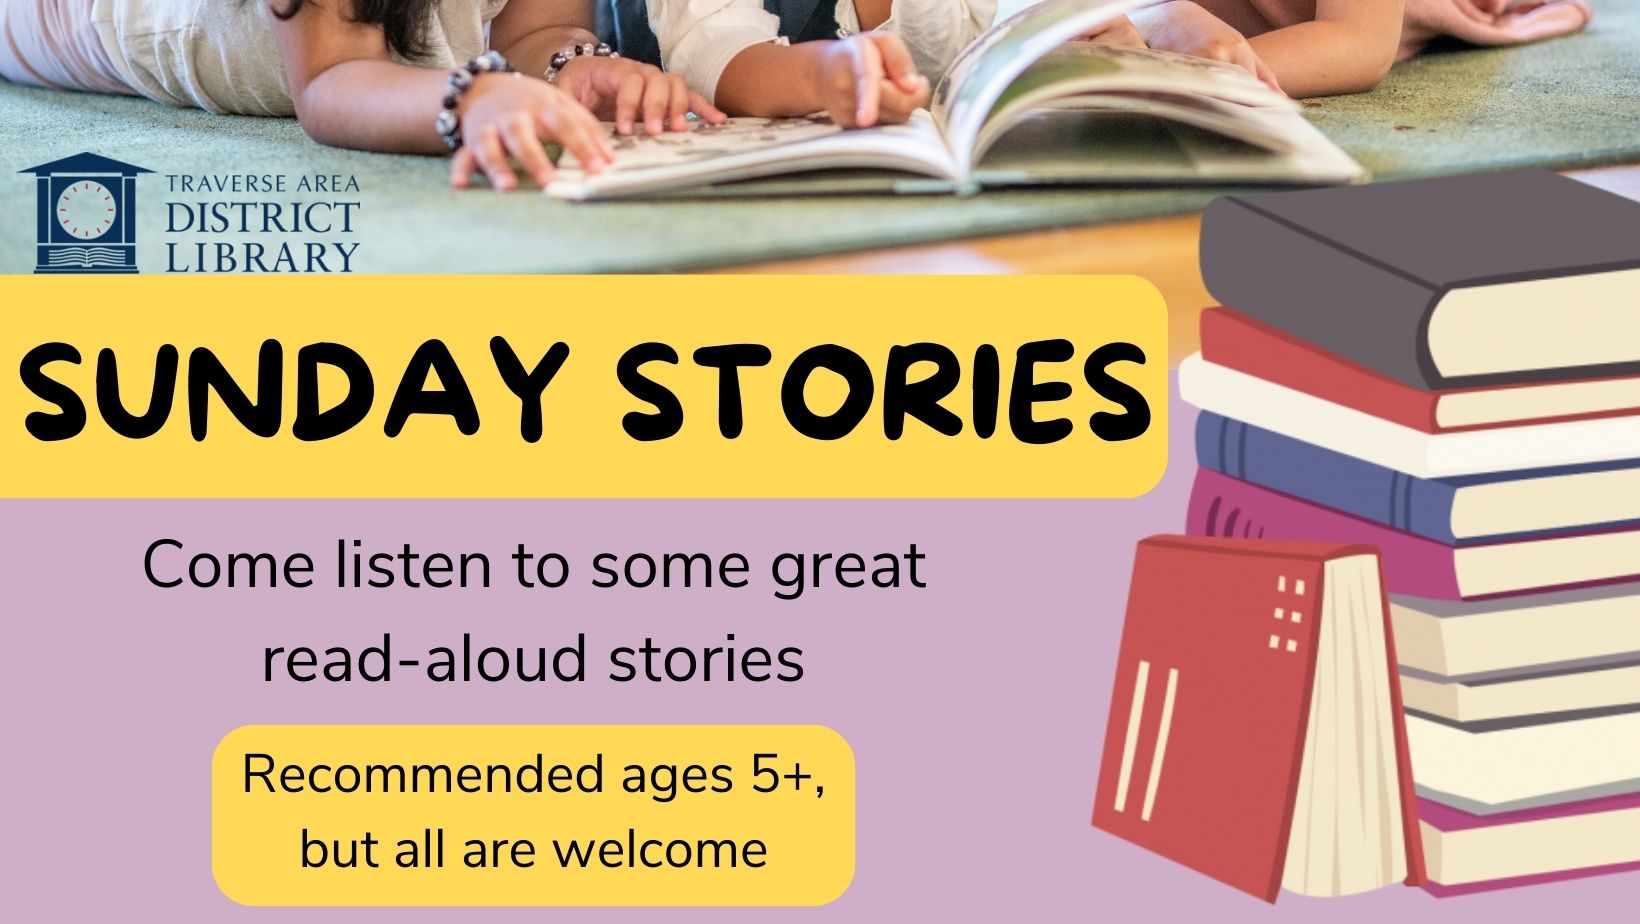 Sunday Stories, read-aloud program, recommended ages 5+